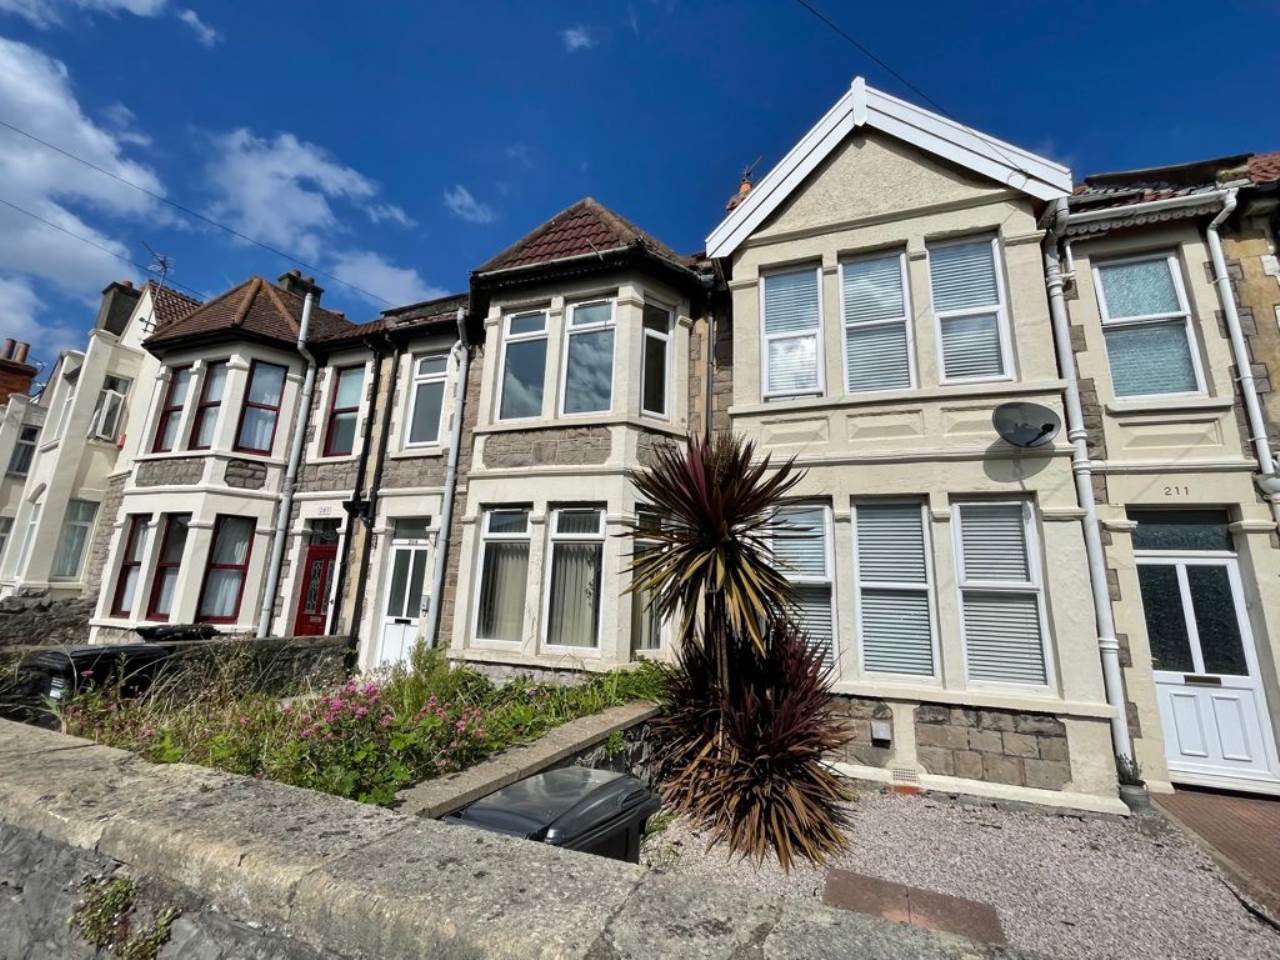 2 bed Maisonette for rent in Weston-Super-Mare. From Cooke & Co - Weston-Super-Mare